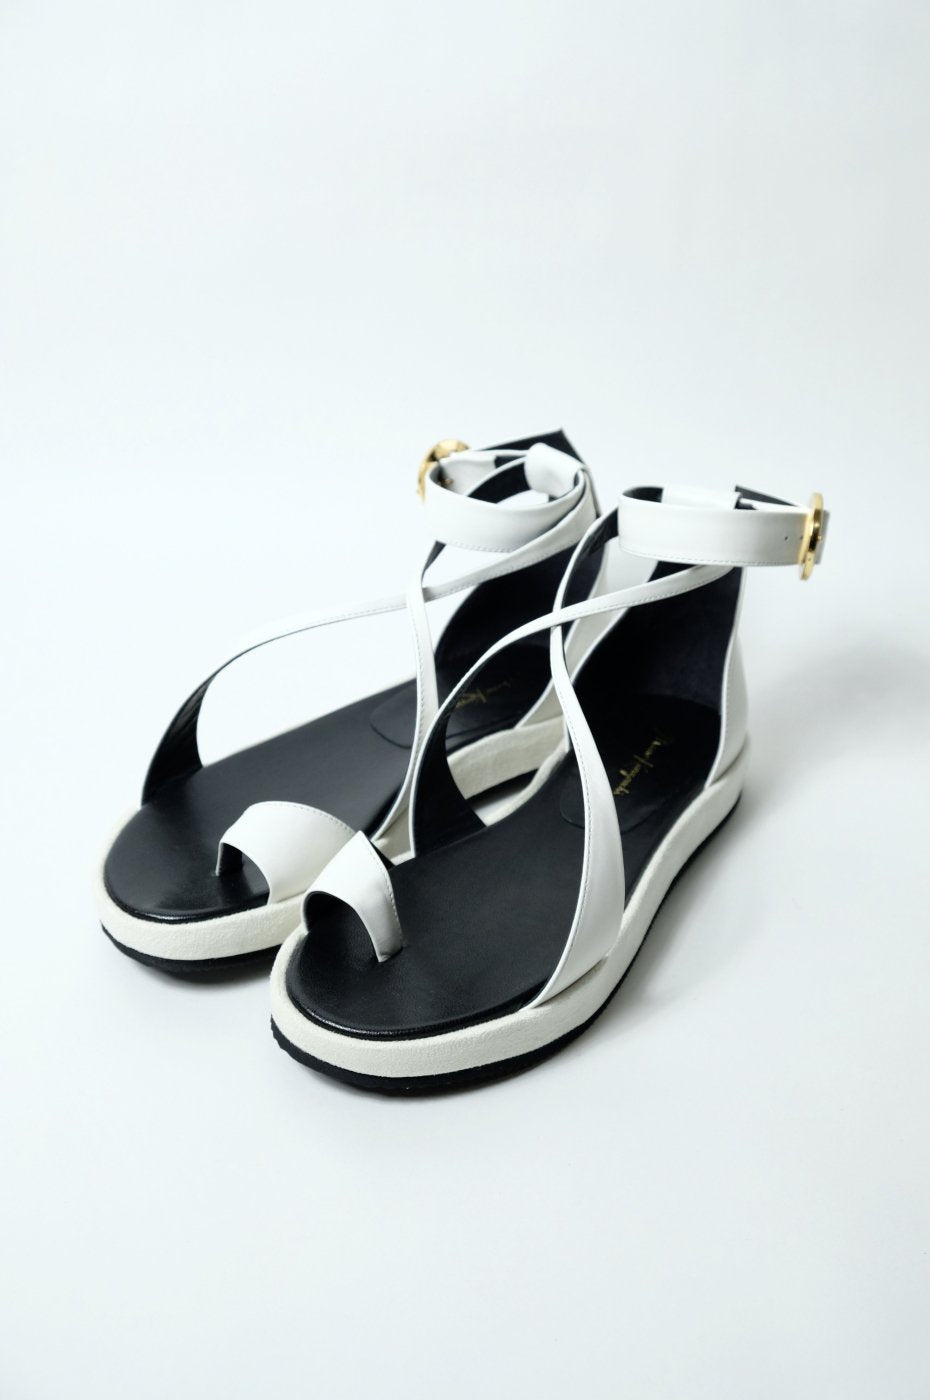 【50% OFF】Mame Kurogouchi "CURVED LINE ANKLE STRAP SANDALS"